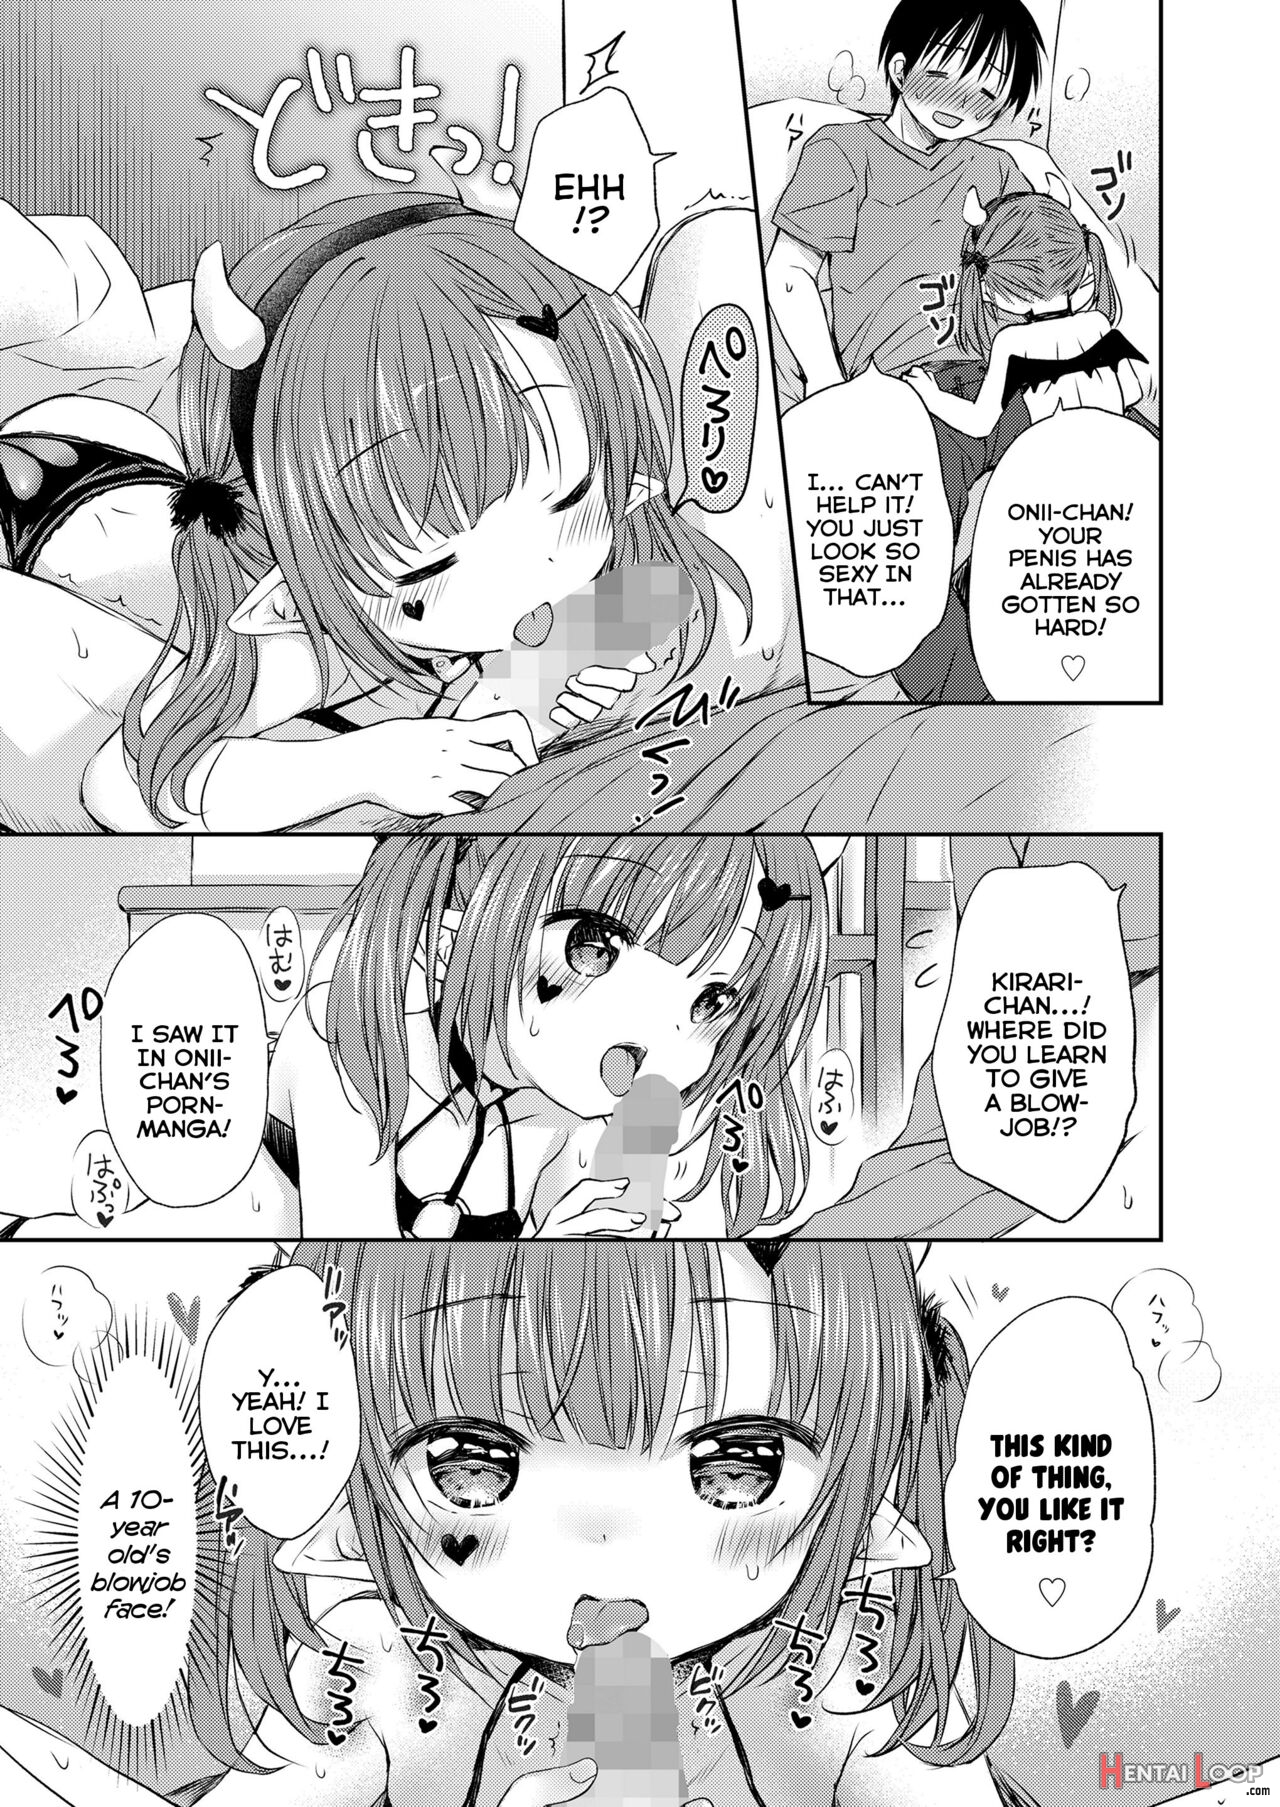 Cosplaying Sex With A Cute-erotic-loli page 5